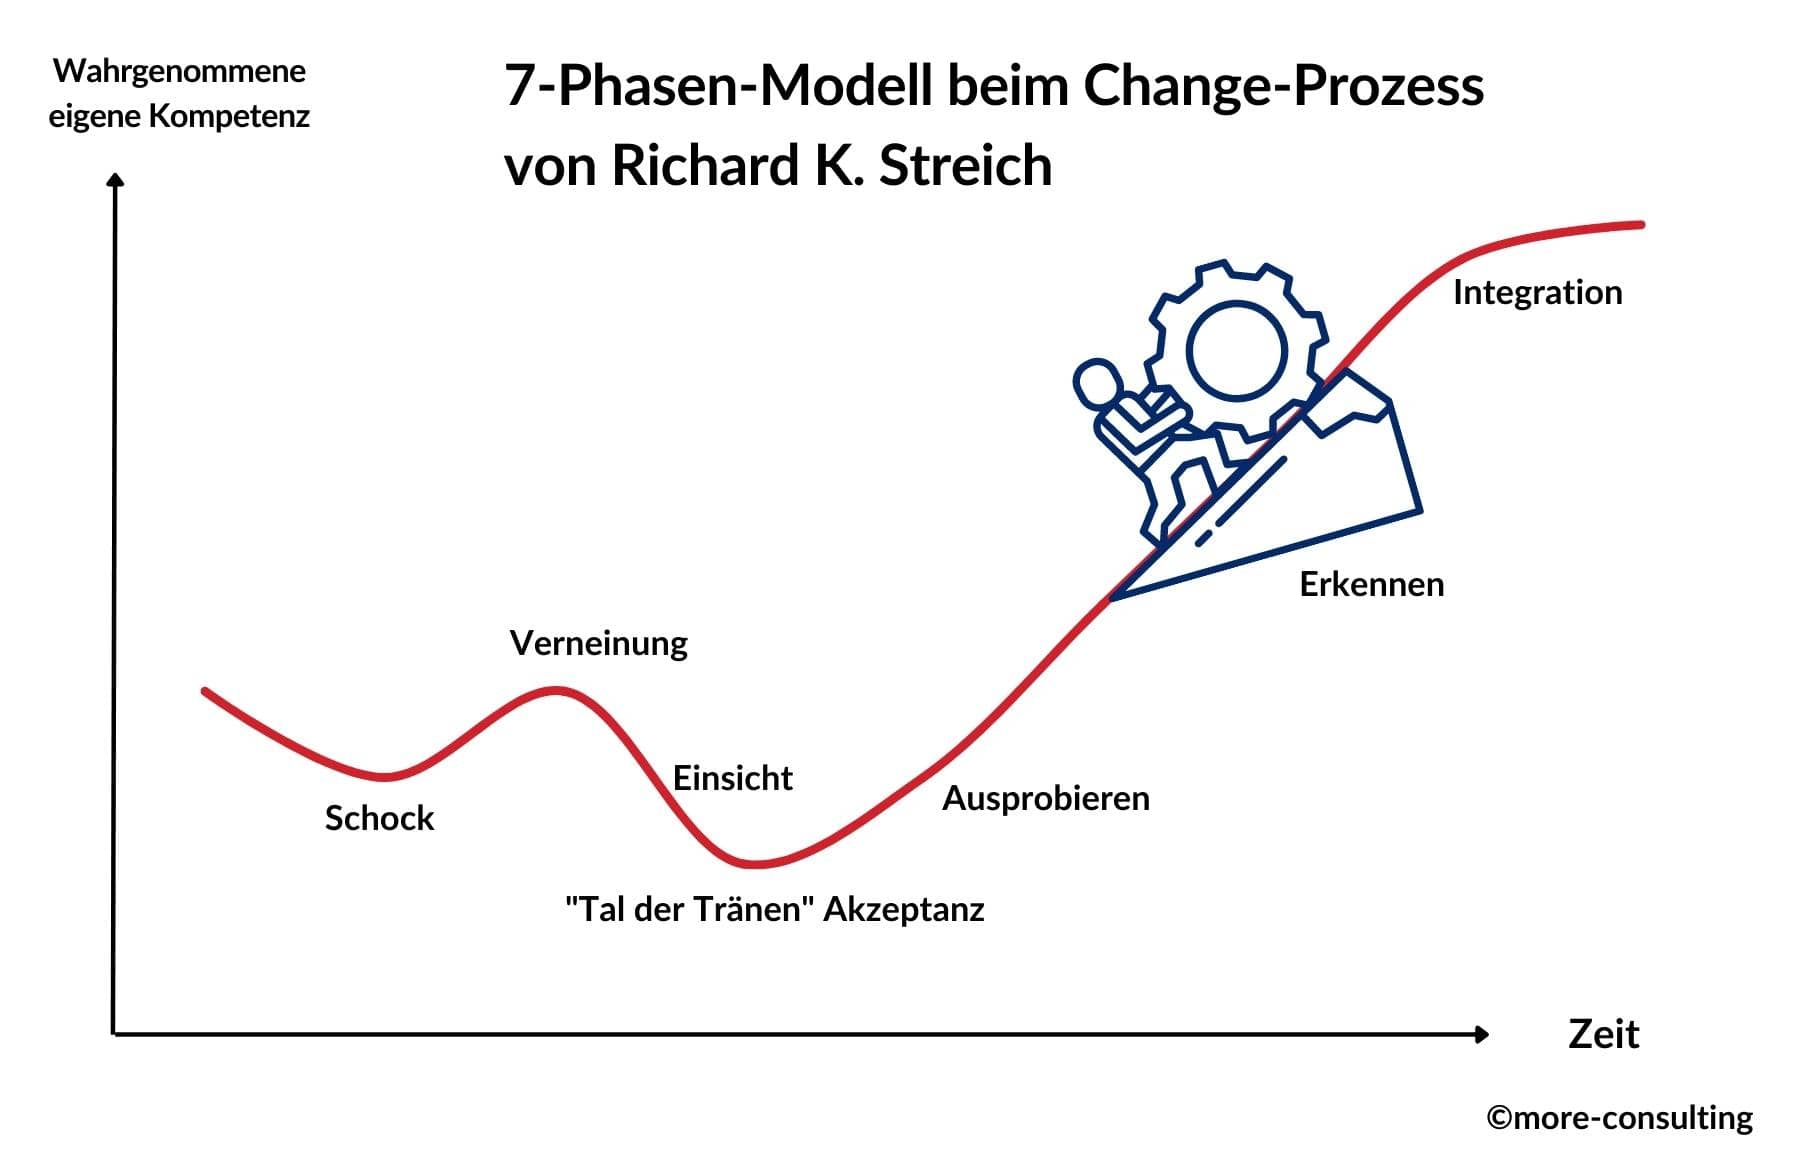 Change management does not work painlessly, but it is rewarded with competitive advantages and increased sales. The graphic shows the seven phases that one goes through in the change process.